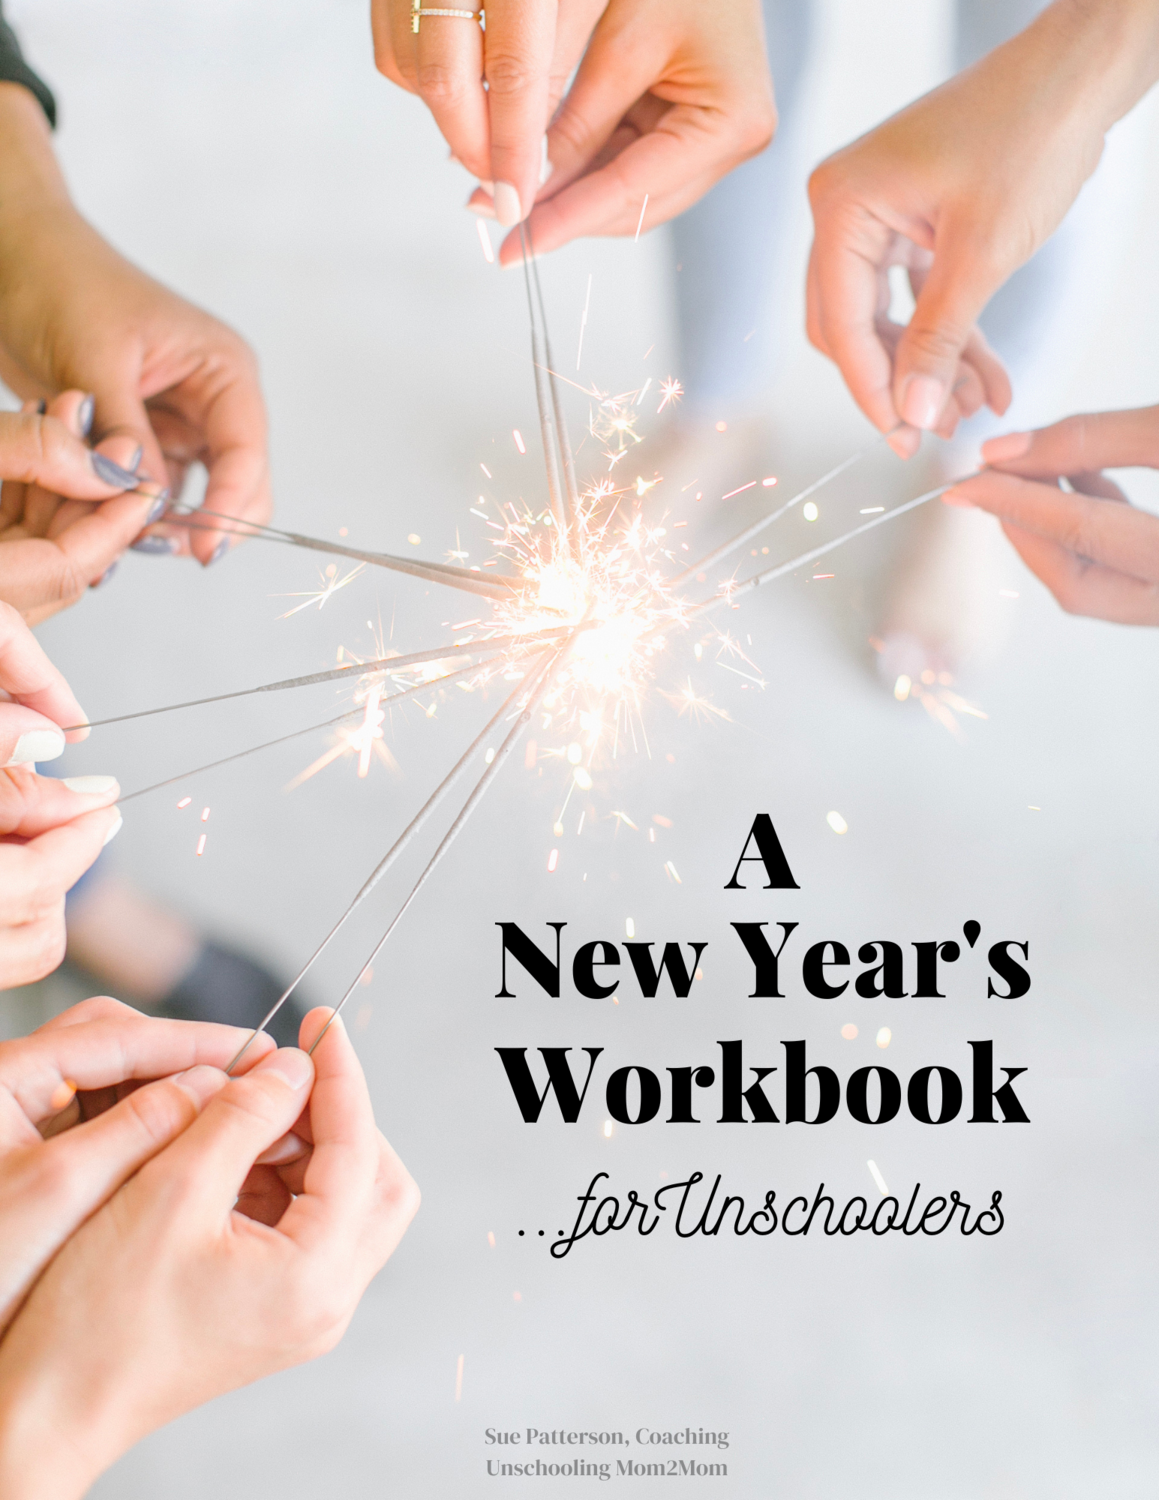 A New Year's Workbook for Unschoolers